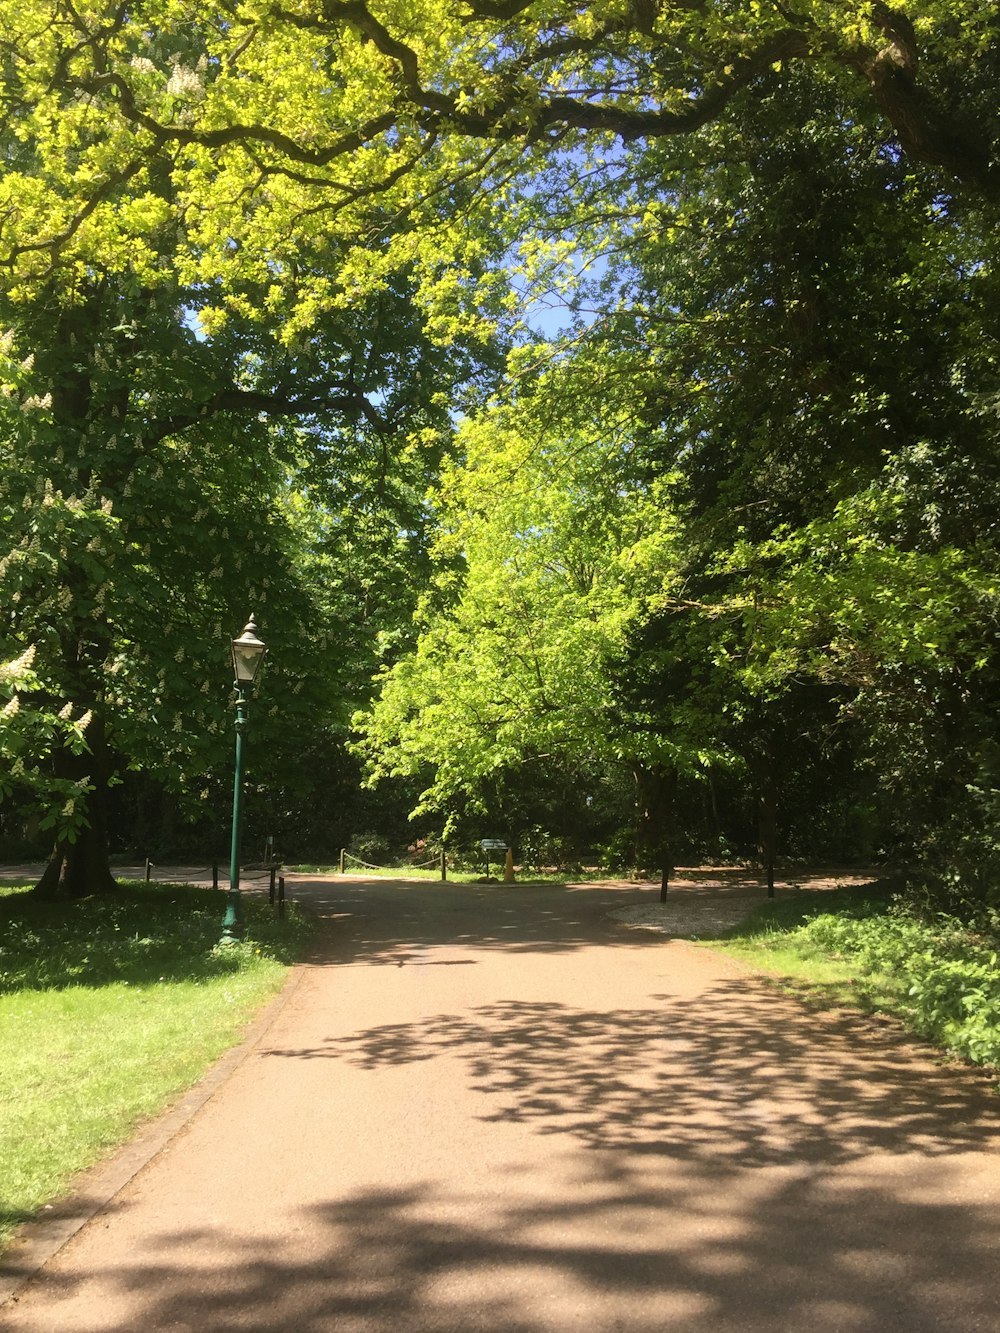 brown concrete pathway between green trees during daytime